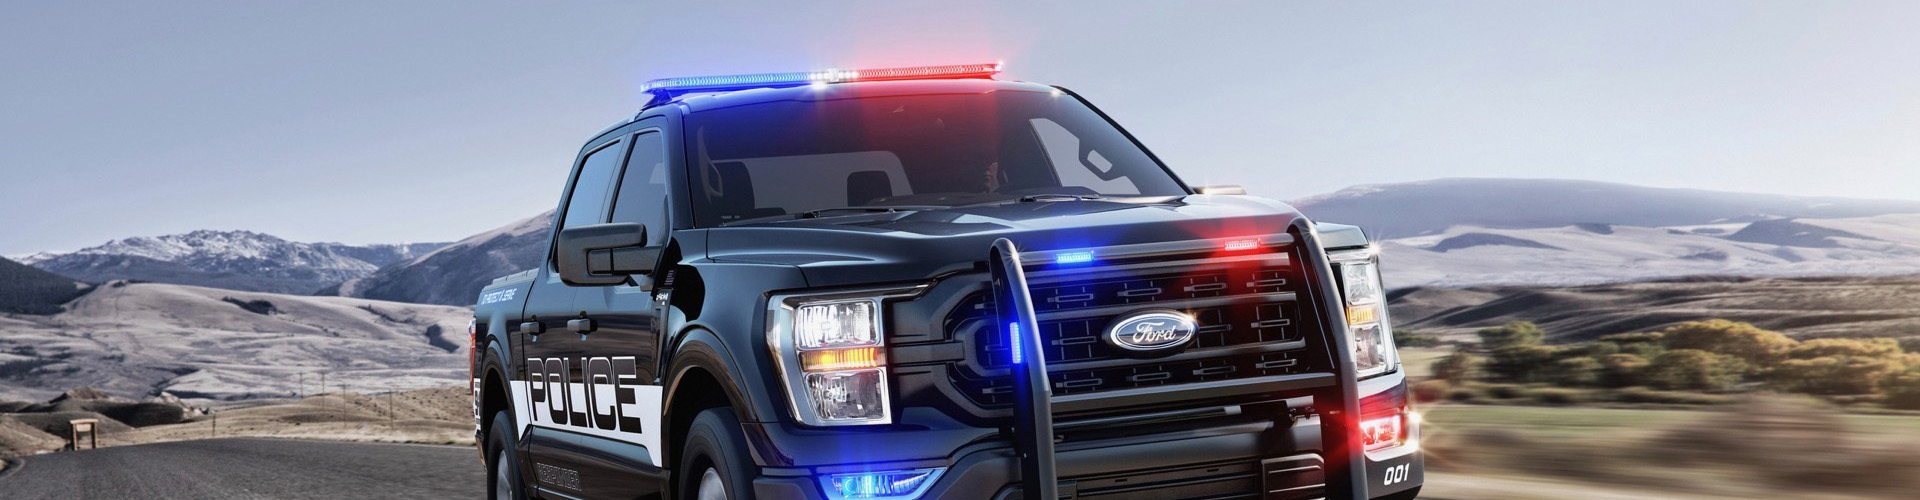 Law enforcement Vehicle monitoring solution